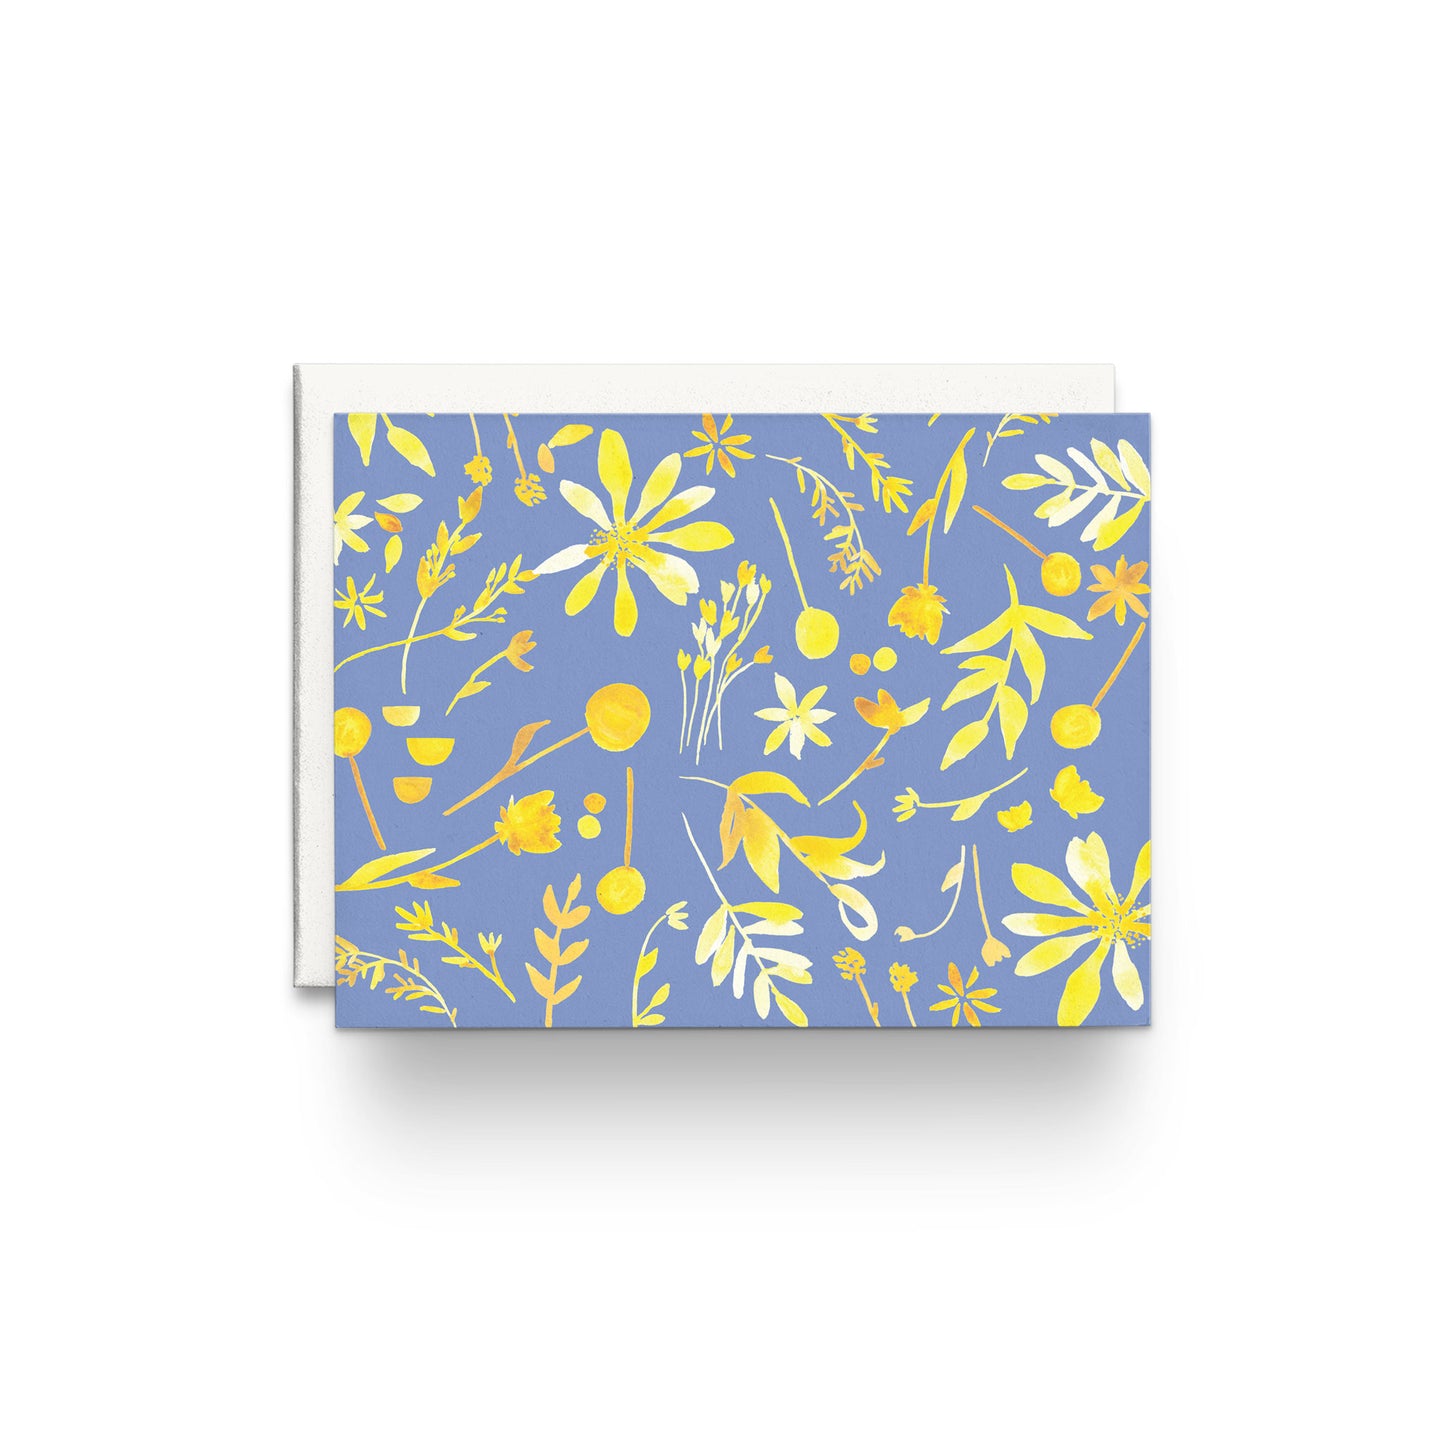 YELLOW & BLUE FLORAL